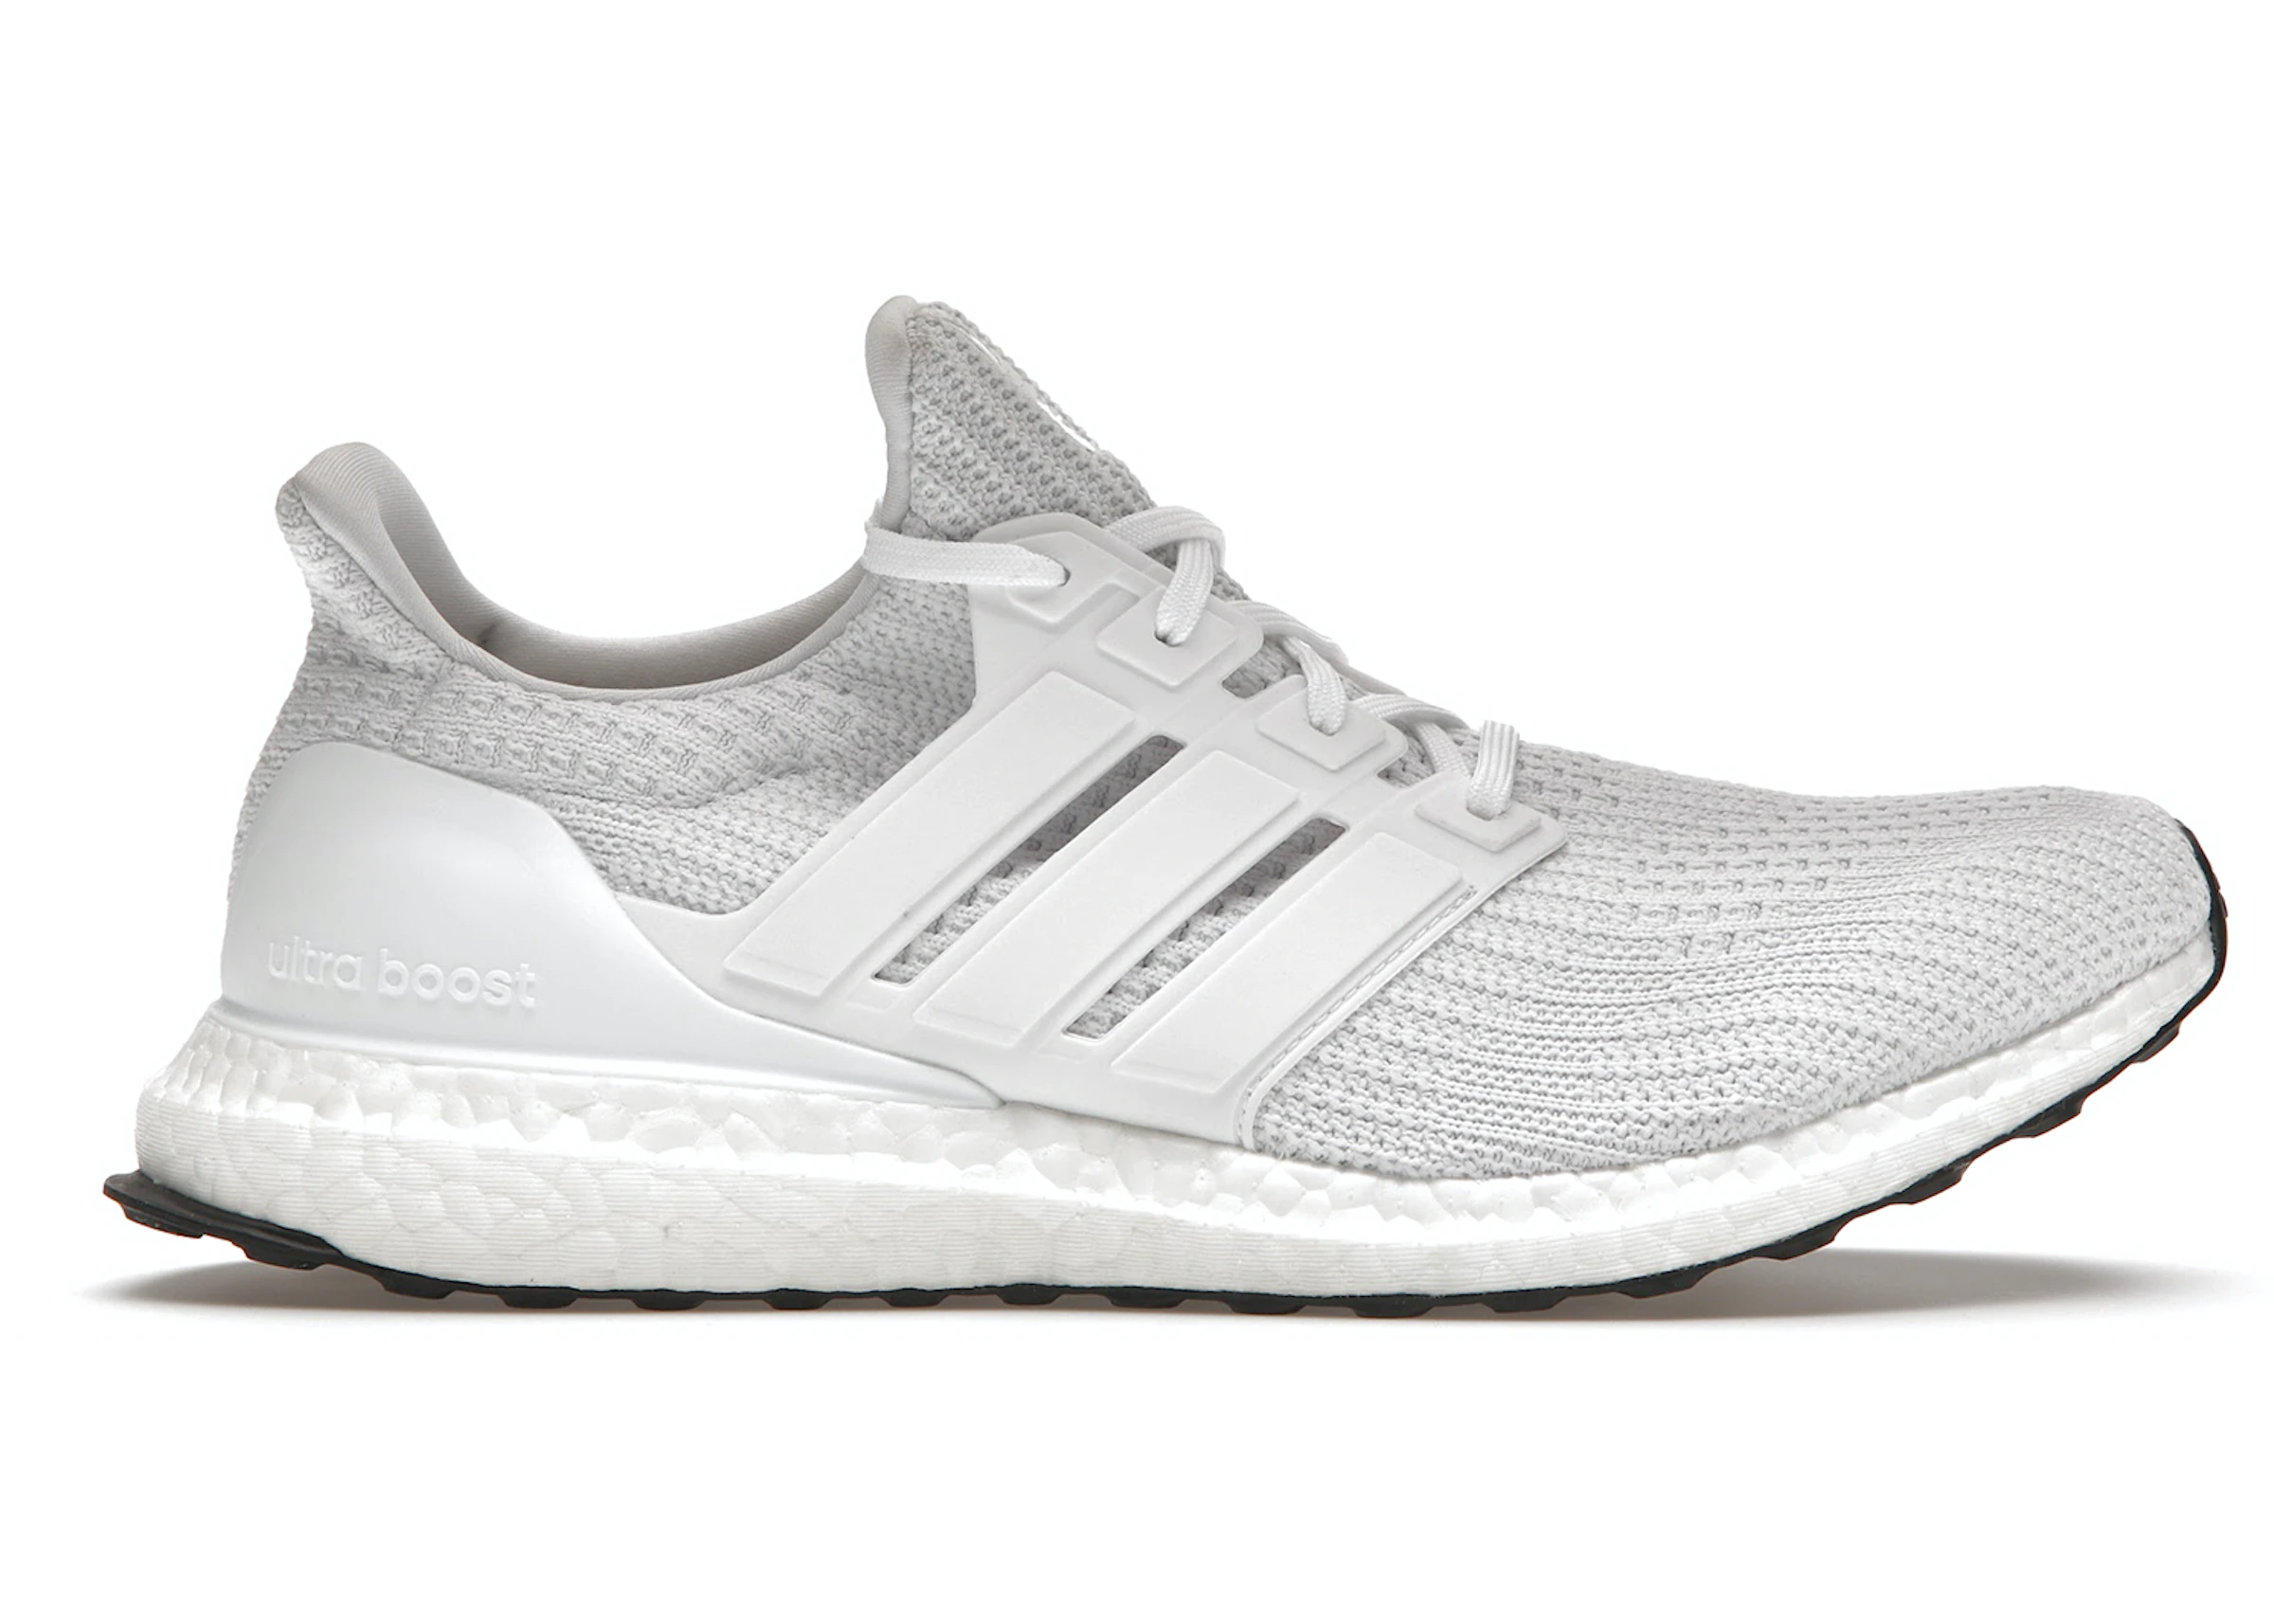 parade Privilege alive Buy adidas Ultra Boost Shoes & New Sneakers - StockX